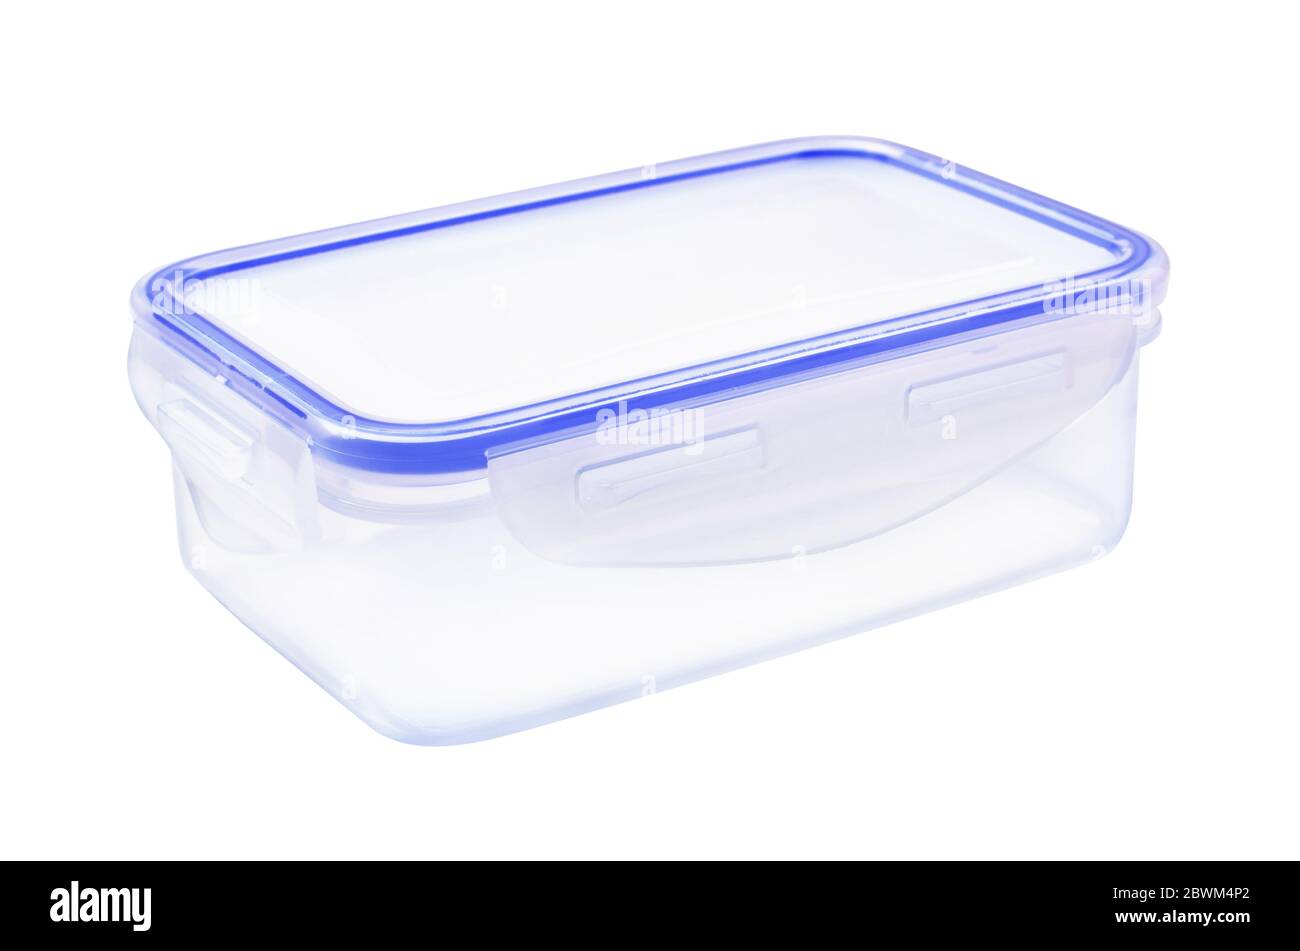 Plastic Lunch Box High Resolution Stock Photography and Images - Alamy